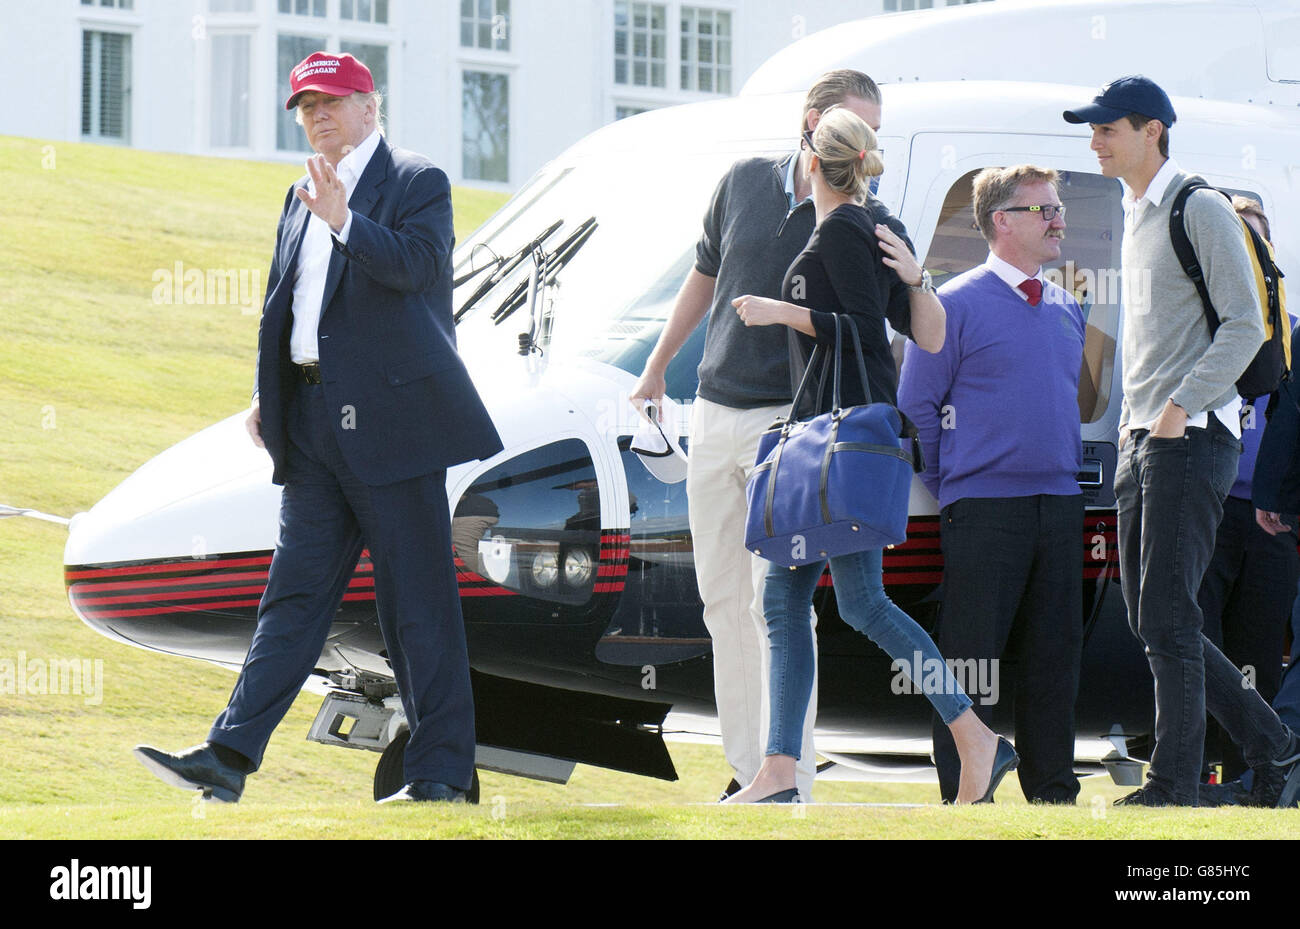 Donald Trump, left, and his entourage arrive by helicopter at his Trump Turnberry golf course in Ayrshire, which is hosting the Ricoh Women's British Open. Stock Photo